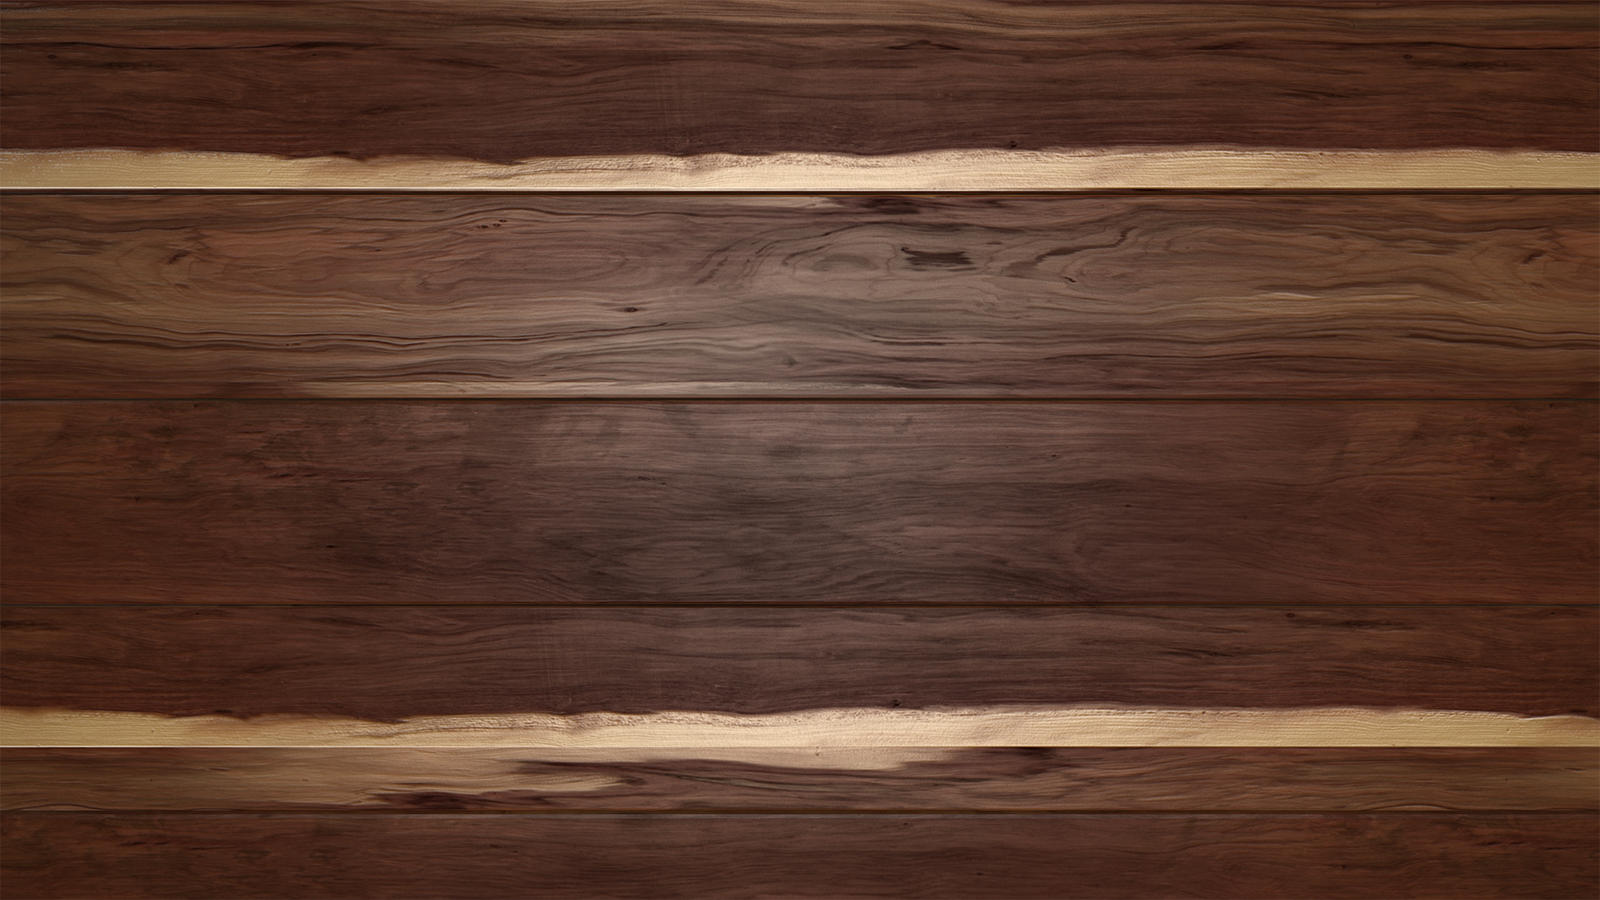 Wood Planks Background nr 1 by RVMProductions on DeviantArt